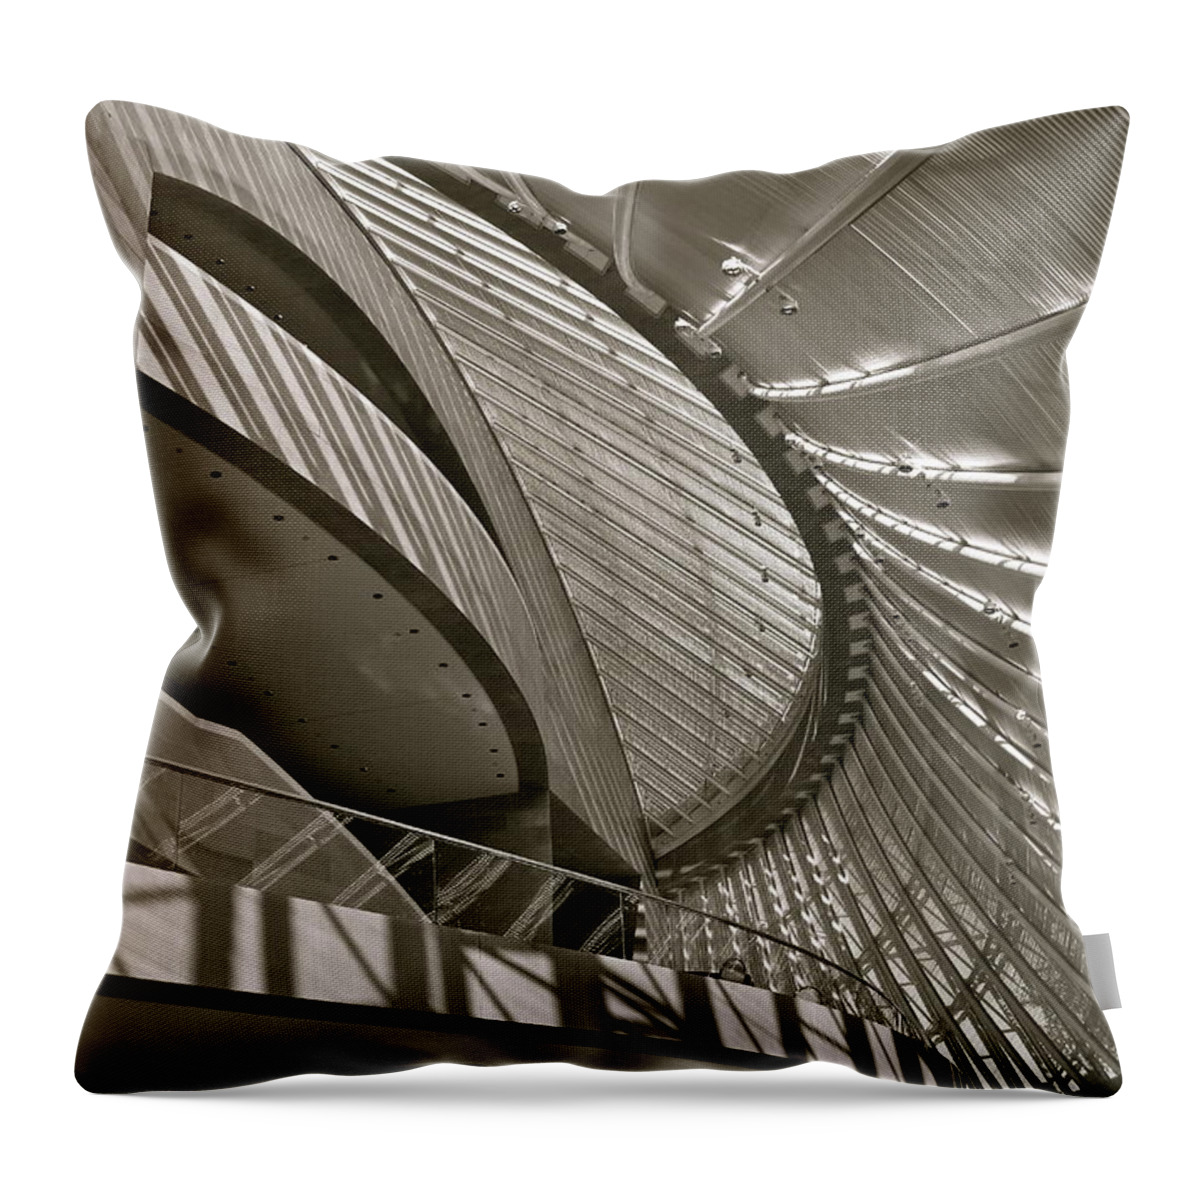 I. M. Pei Throw Pillow featuring the photograph Mort Myerson Symphony Hall Interior by John Babis